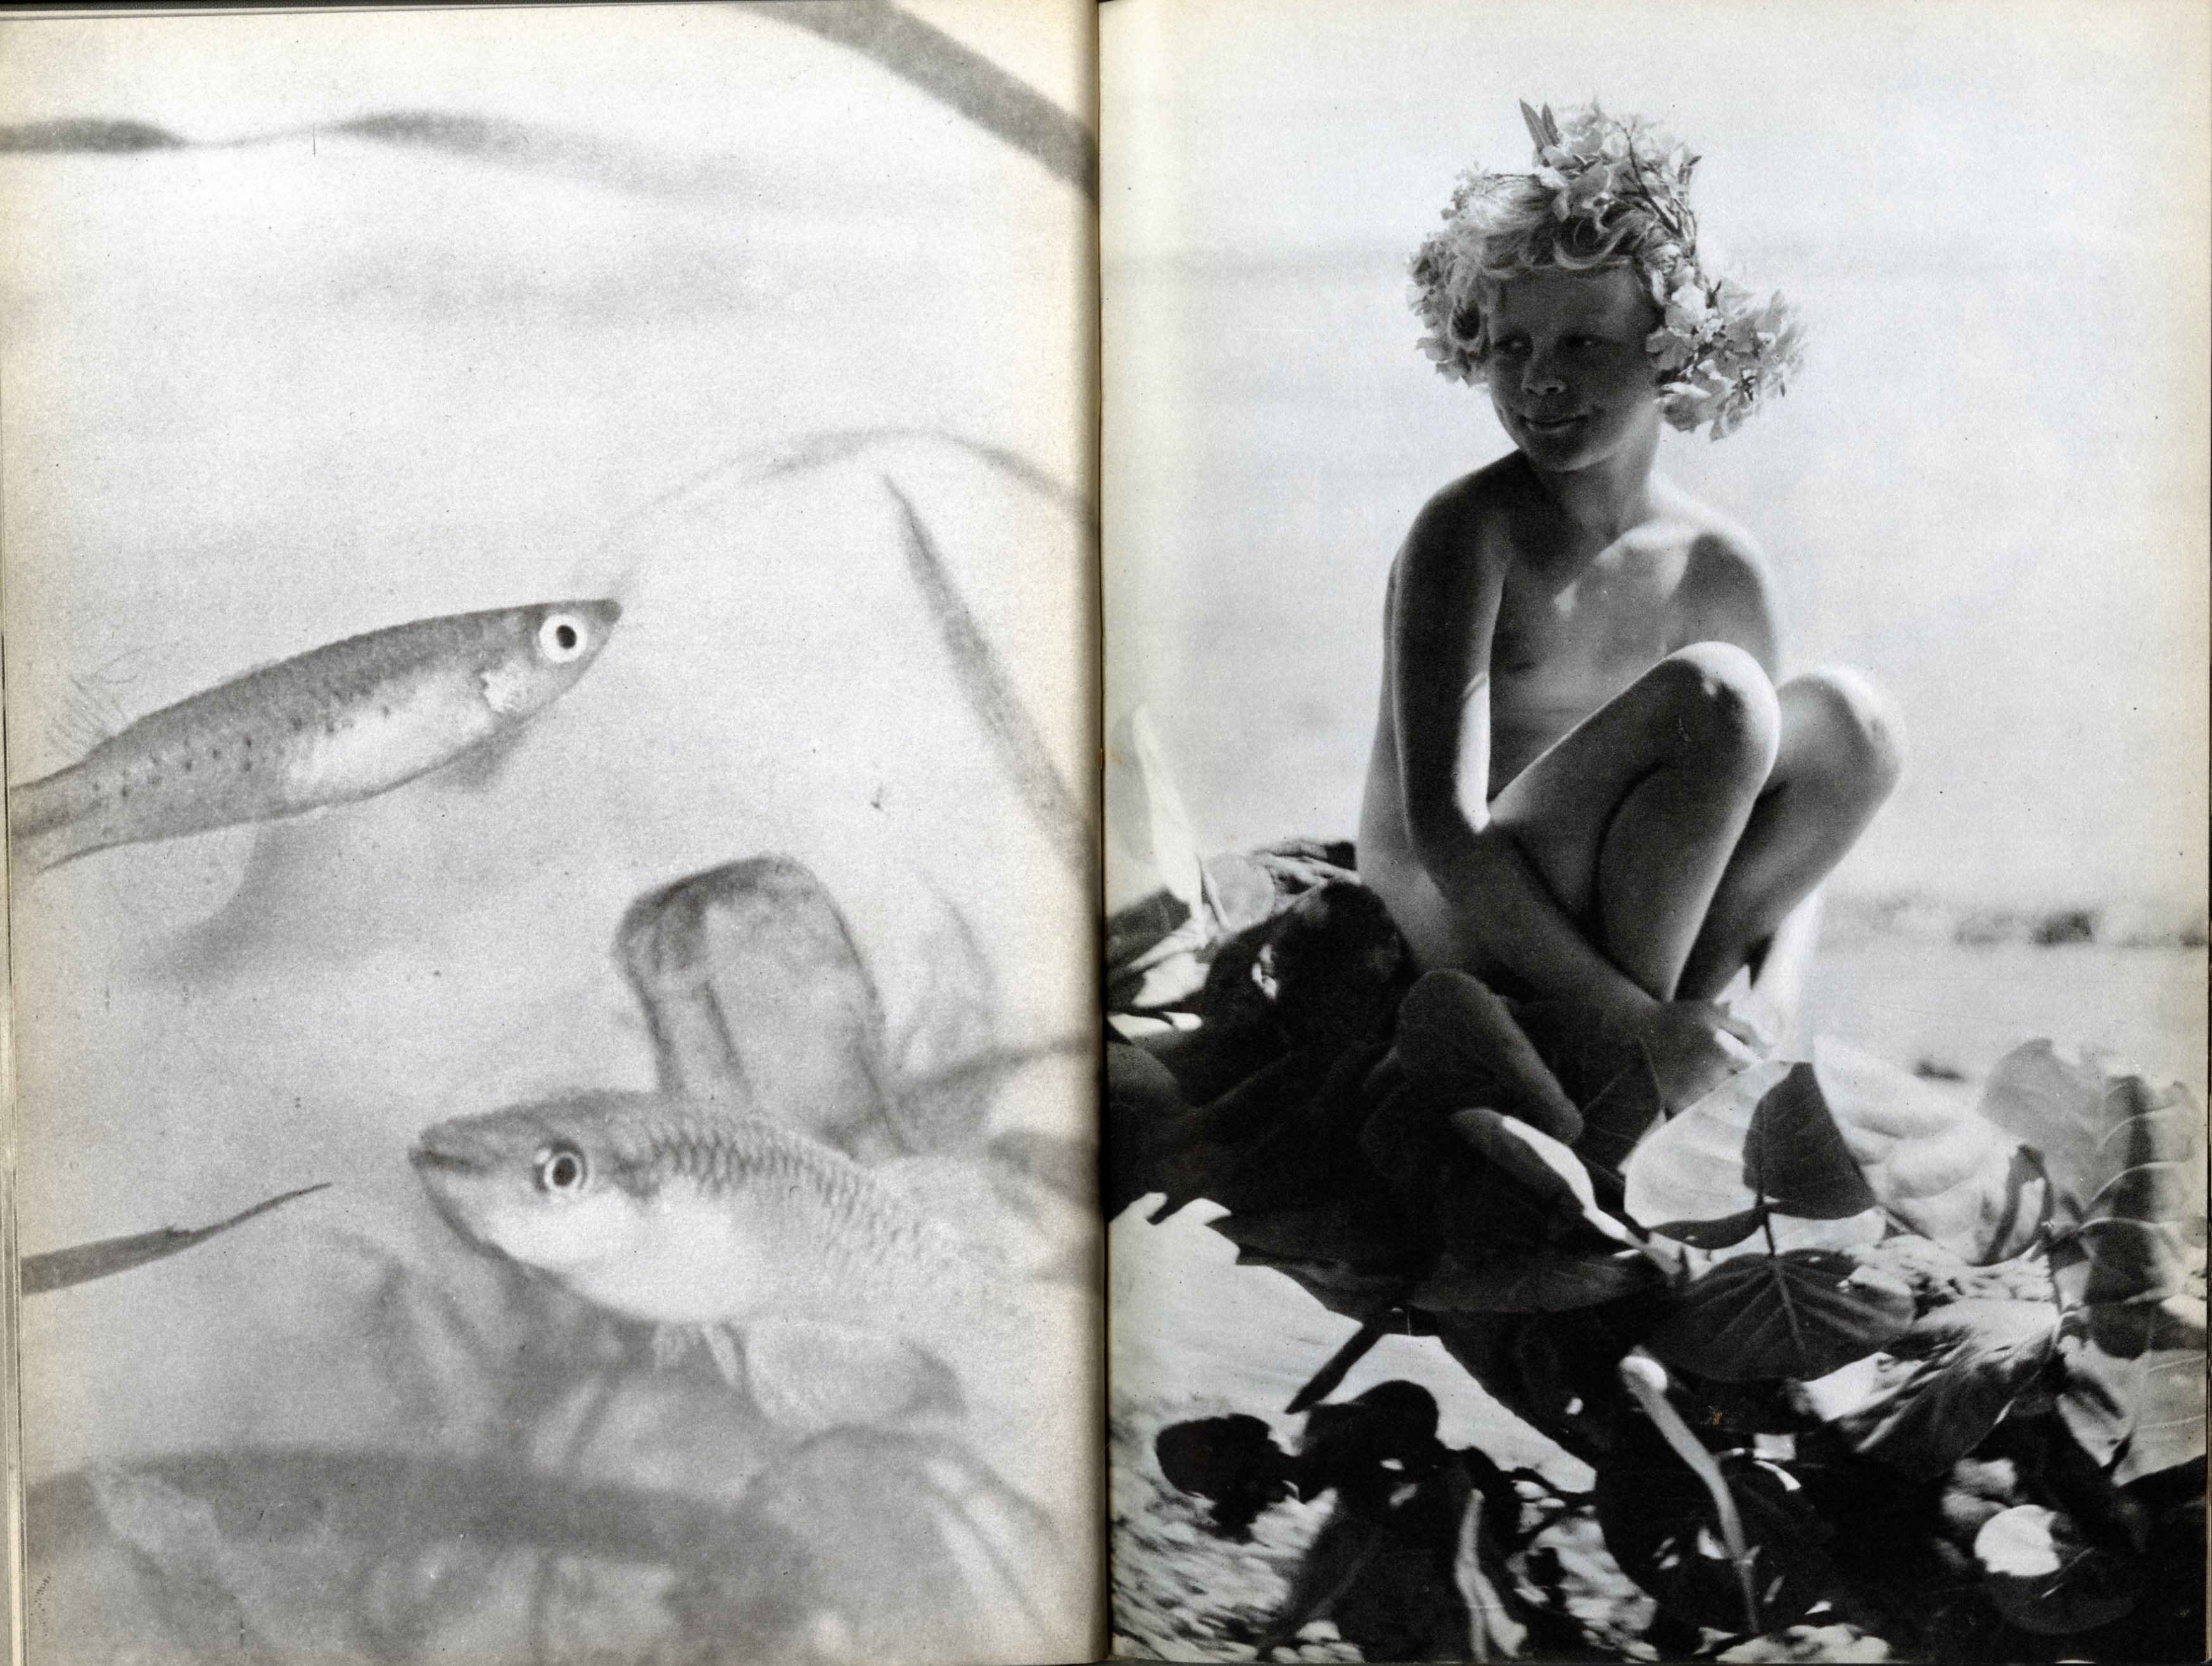 Nell Dorr - Nell Koons :: from "In a Blue Moon", published by G. P. Putnam’s Sons in 1939.